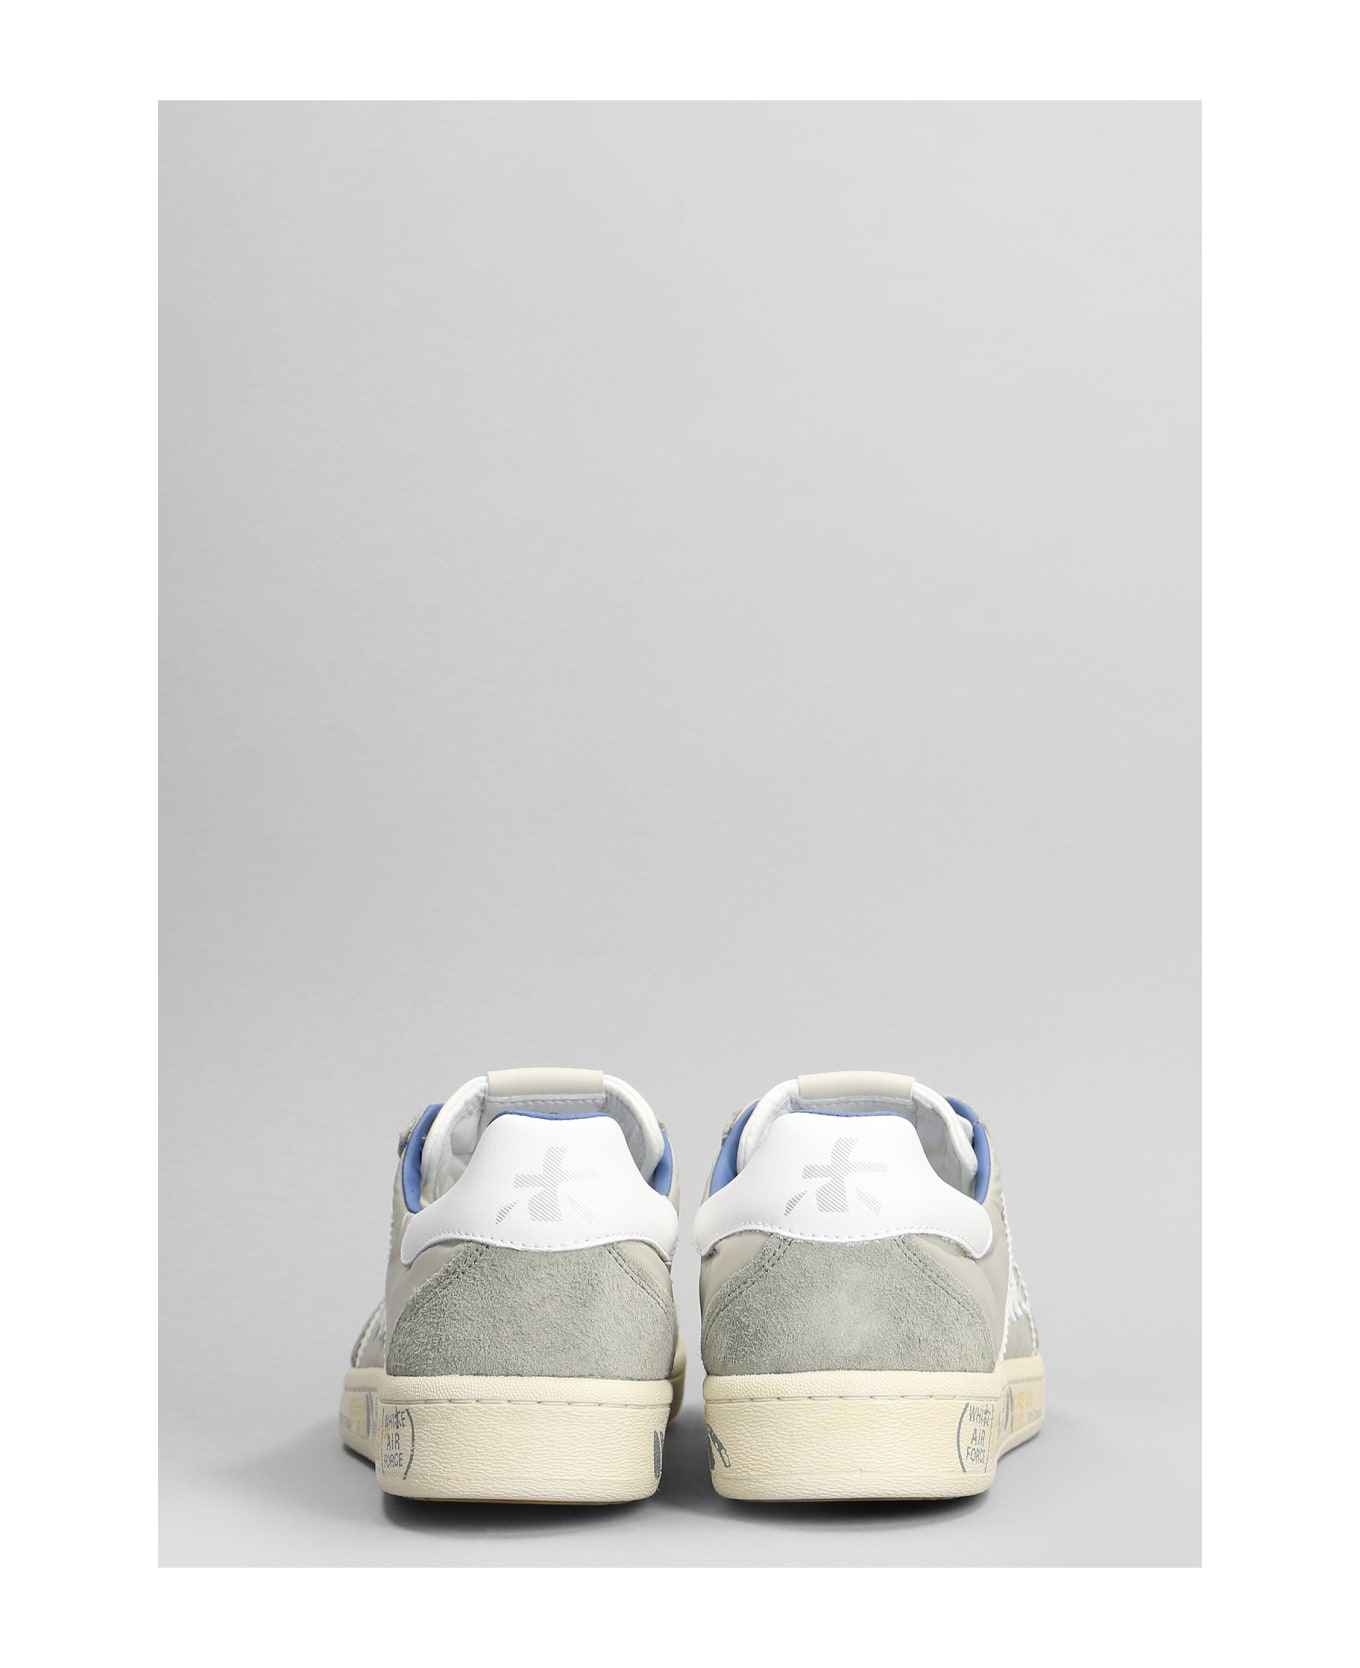 Premiata Bonnie Sneakers In Grey Suede And Fabric - grey スニーカー